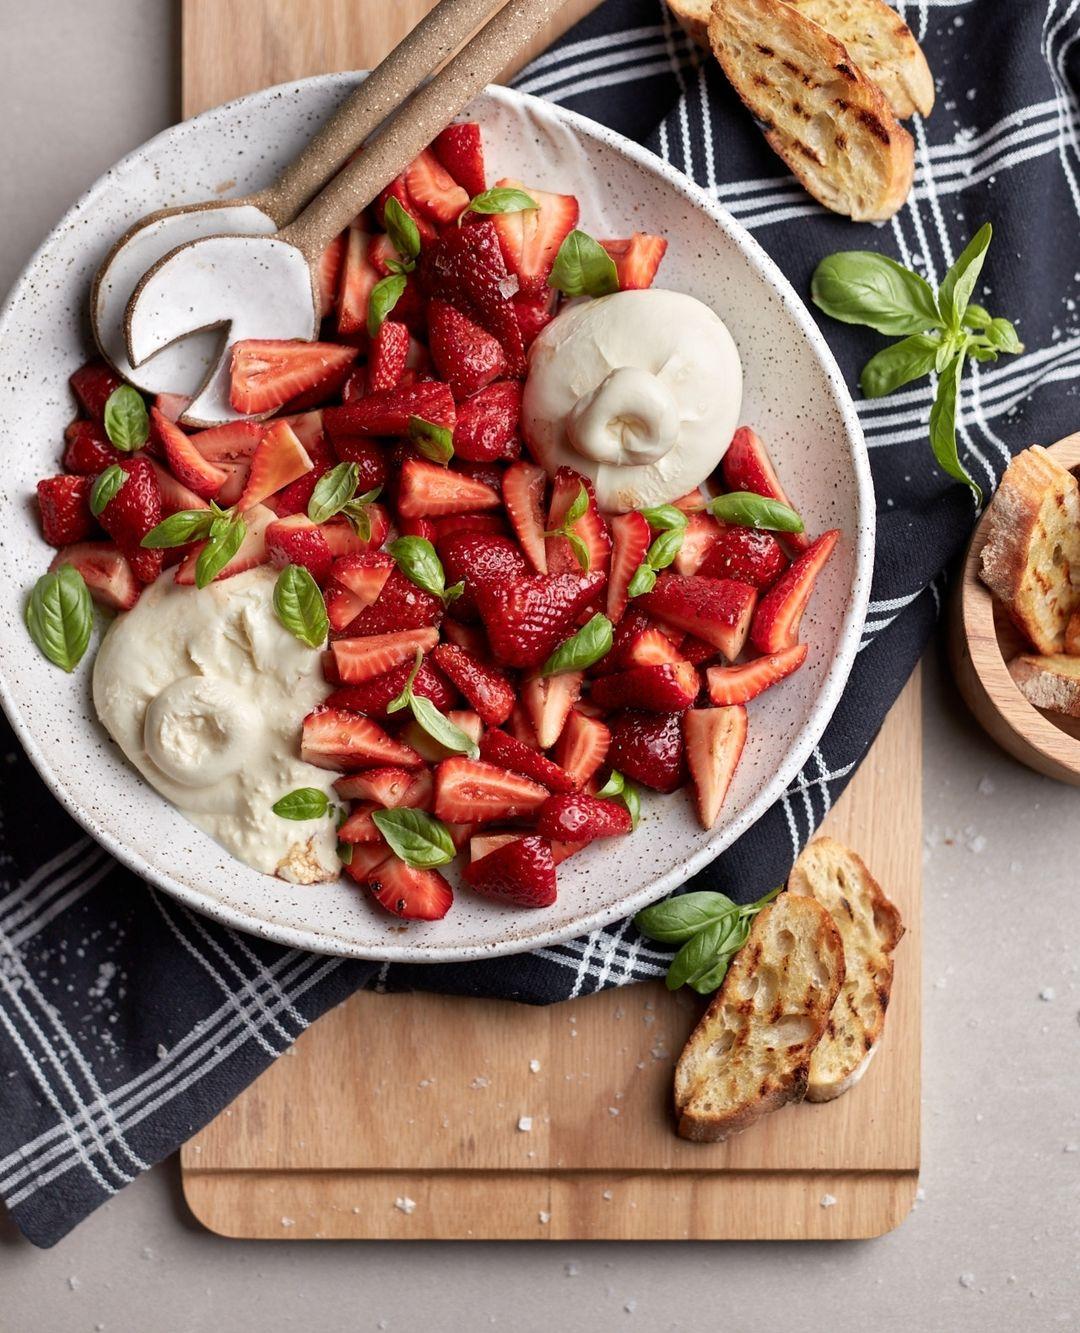 class="content__text"
 How good are strawberries at the moment!? 😍🍓⁠
Recipe I recently created for @vicstrawberries⁠
⁠
🍓 Strawberries with Burrata⁠
⁠
x2 250g punnet strawberries⁠
2 tbsp balsamic vinegar⁠
1 tbsp maple syrup⁠
freshly ground black pepper⁠
sea salt flakes⁠
2 x 100g burrata balls⁠
baby basil leaves, picked⁠
baguette slices, chargrilled, for serving⁠
extra virgin olive oil, for serving⁠
⁠
Hull and quarter the strawberries, and place into a large bowl. Mix through the balsamic vinegar, maple syrup and black pepper. ⁠
⁠
Place the burrata balls on a large platter, and spoon the strawberry mixture onto the platter. Drizzle over any extra juices, top with sea salt flakes, baby basil leaves and a drizzle of olive oil. ⁠ 
 